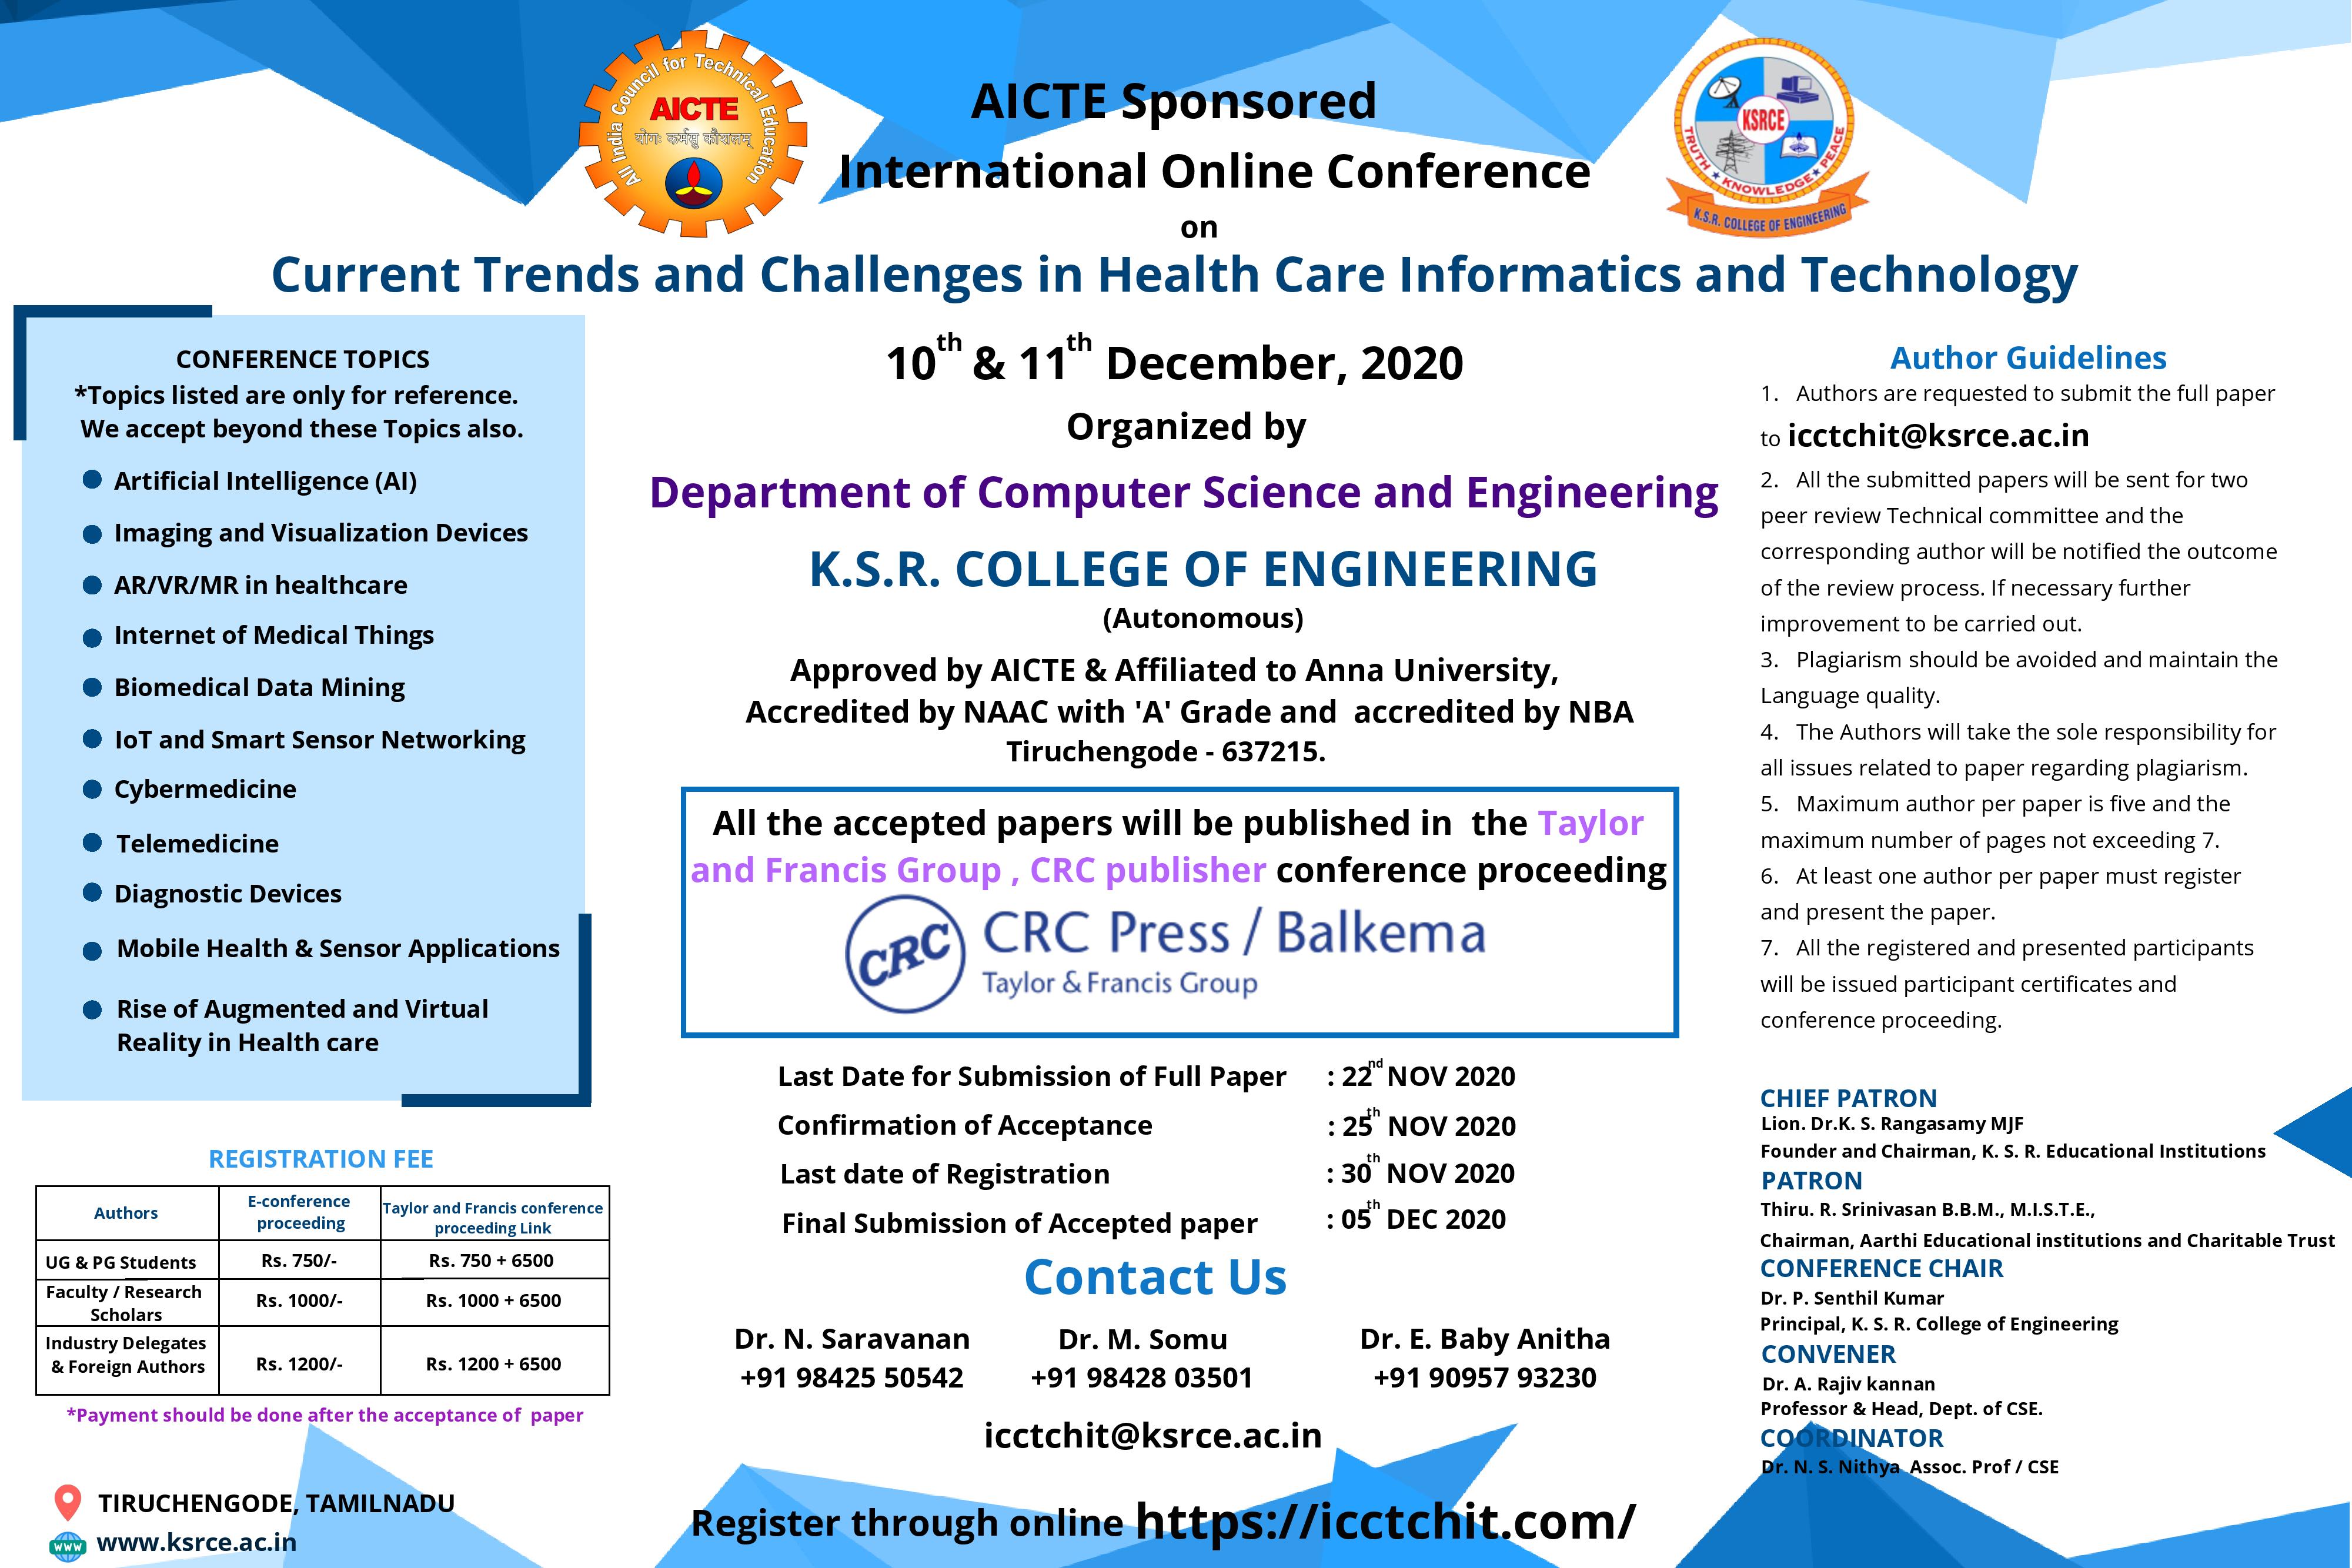 International Online Conference on Current Trends and Challenges in Health Care Informatics and Technology, Namakkal, Tamil Nadu, India